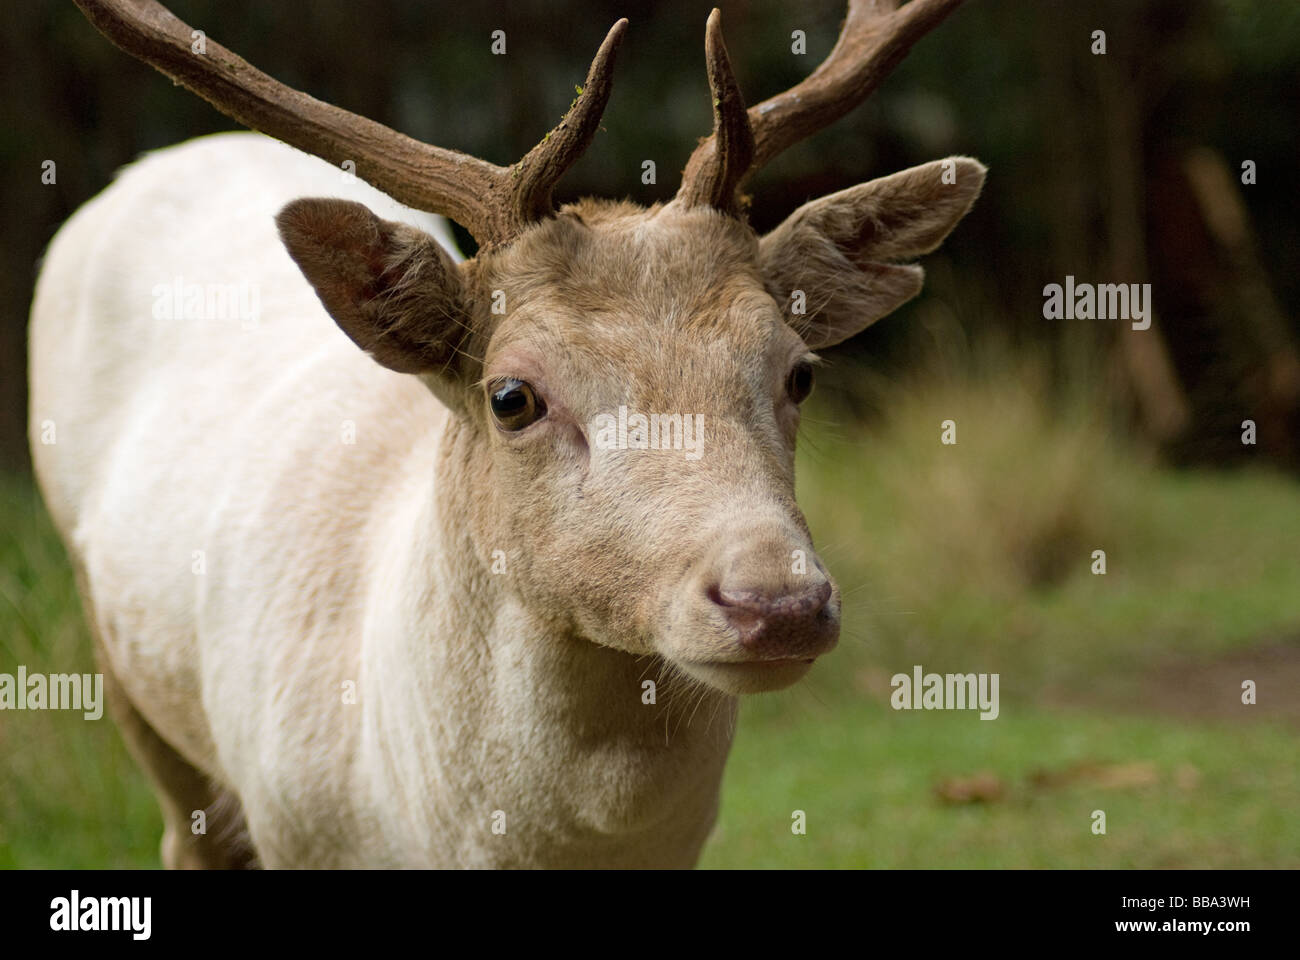 A rare white male Reindeer in forest near Knysna, South Africa. Stock Photo